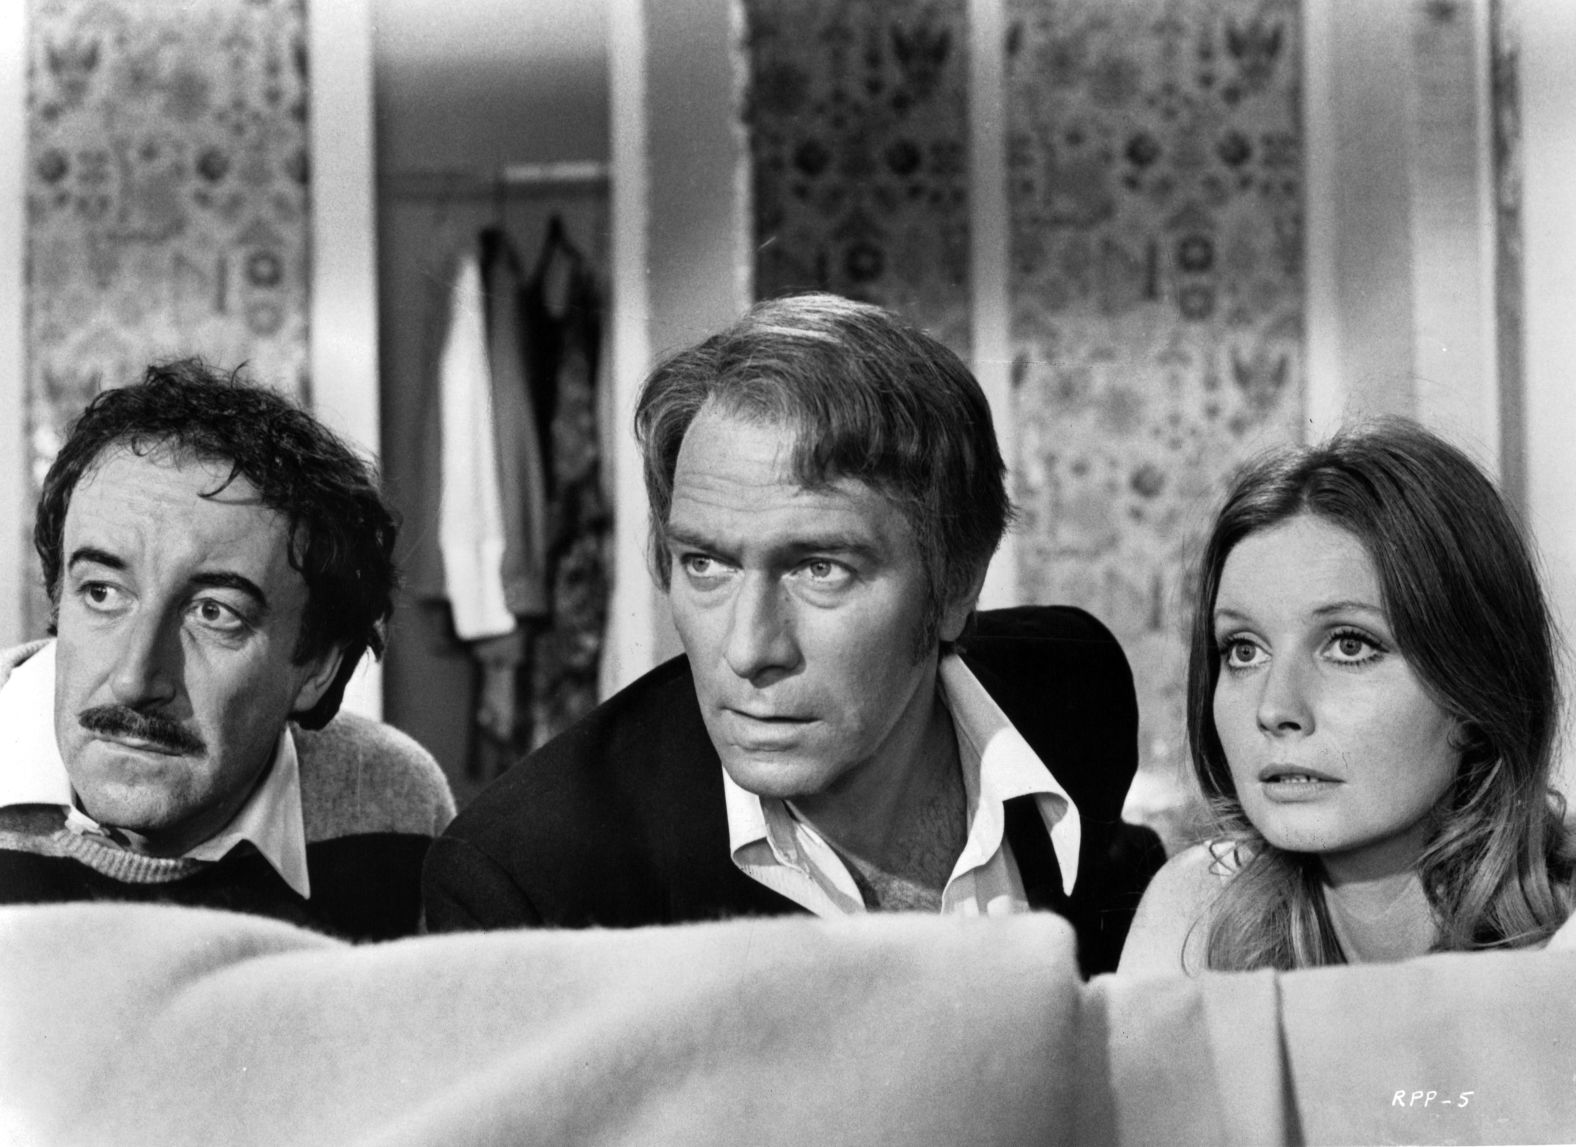 From left, Peter Sellers, Plummer and Catherine Schell appear in the 1975 film "The Return of the Pink Panther."